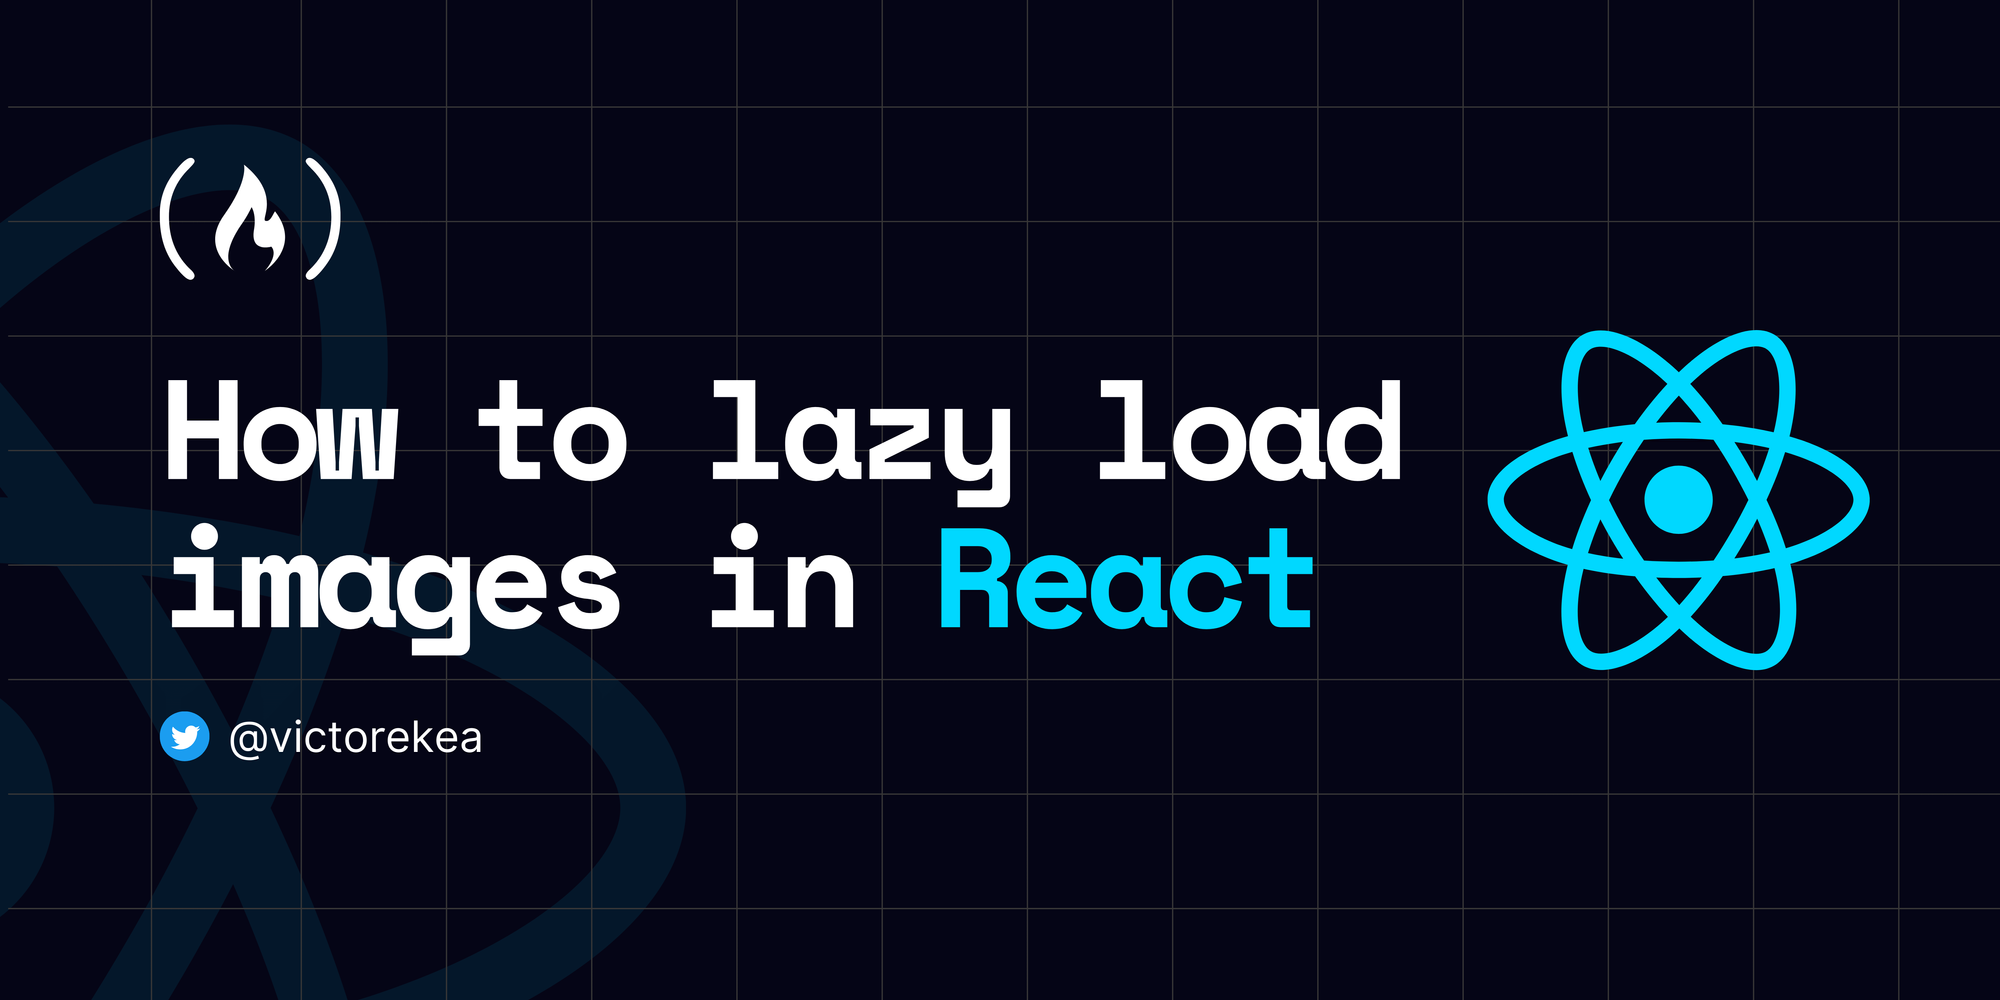 How to Lazy Load Images in React